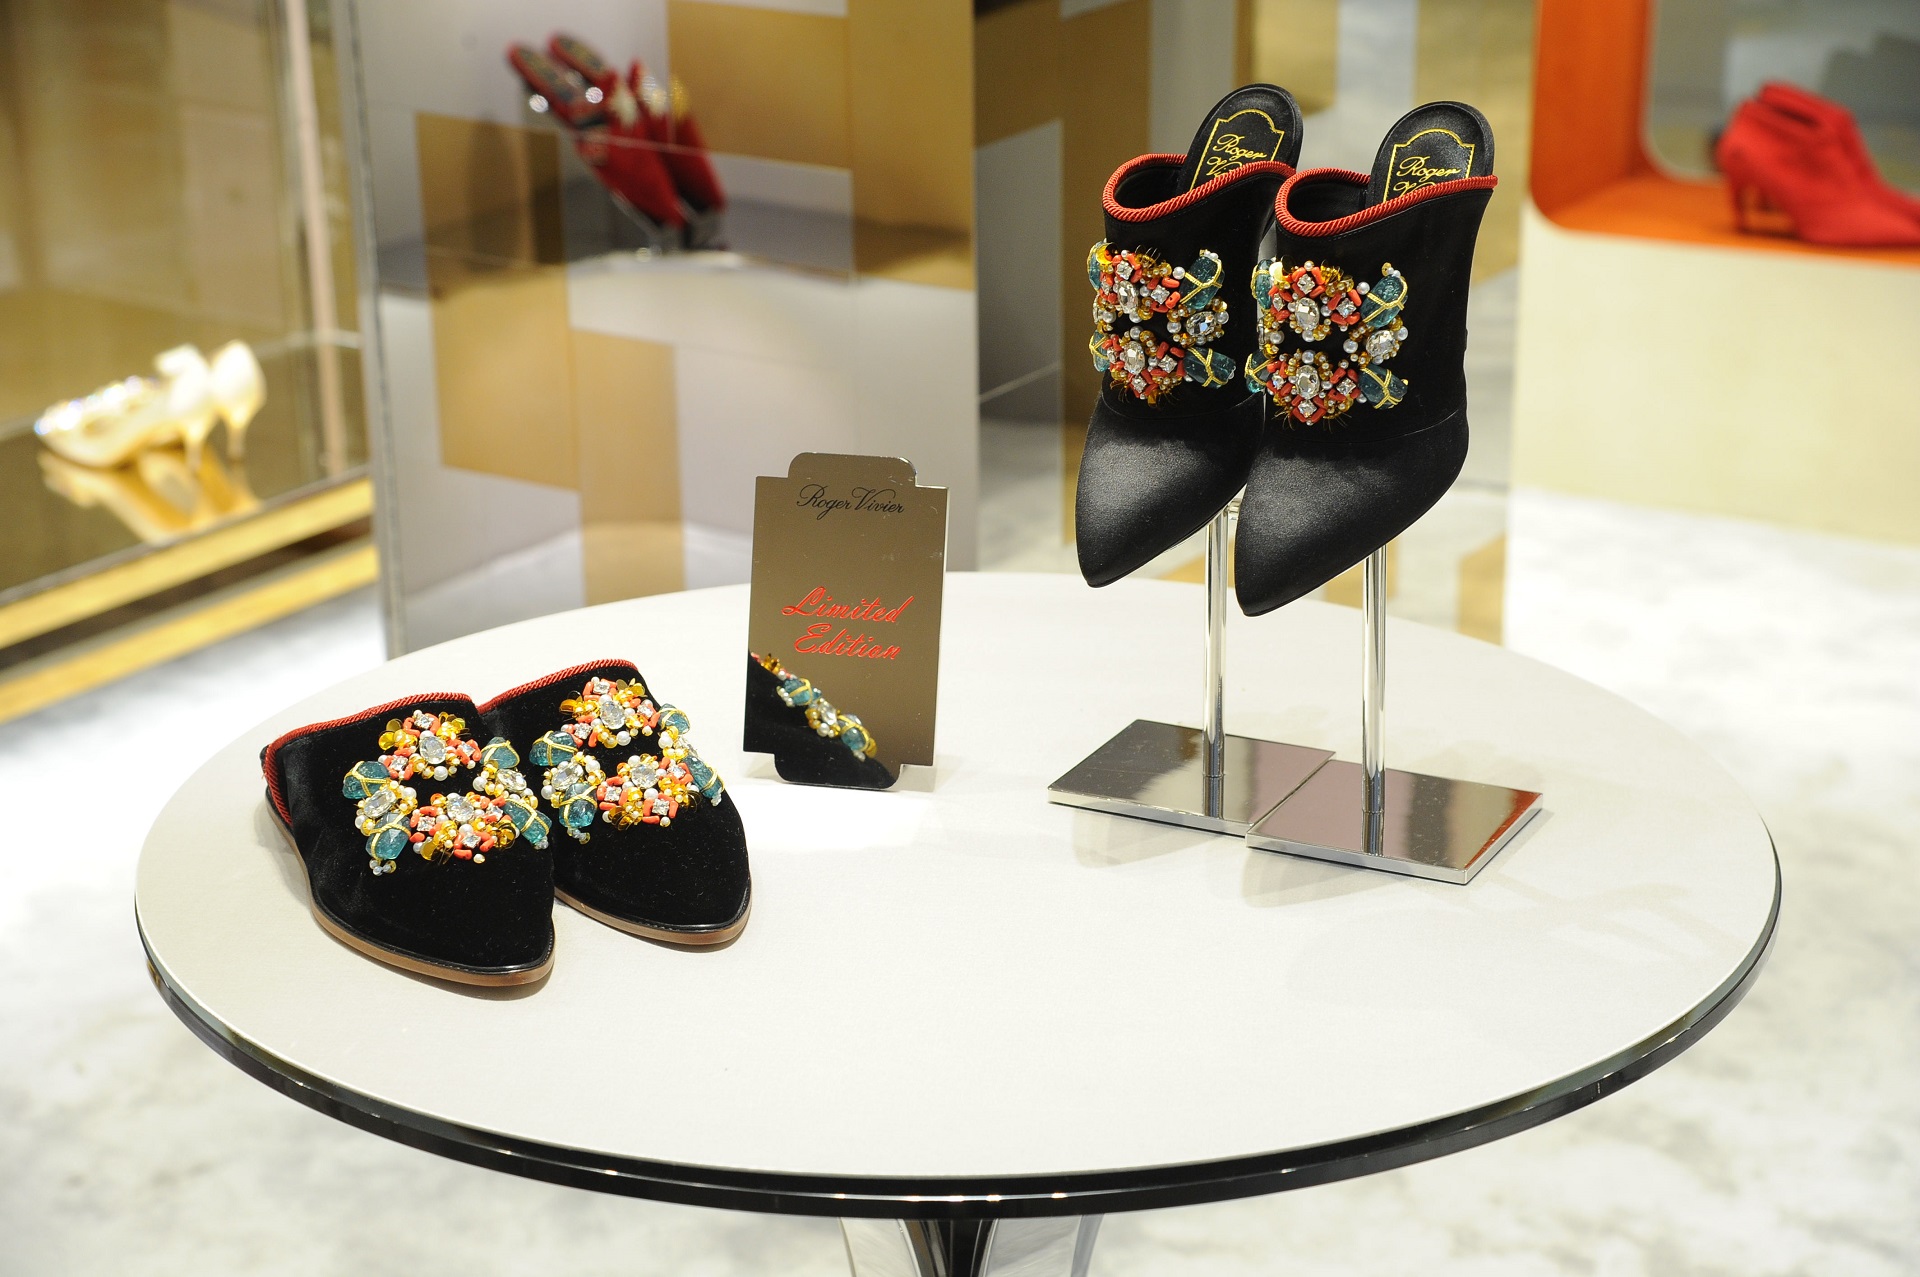 Roger Vivier is bringing a slice of the brand’s Parisian spirit, eclecticism and fantasy to Pacific Place in the form of an exclusive pop-up store